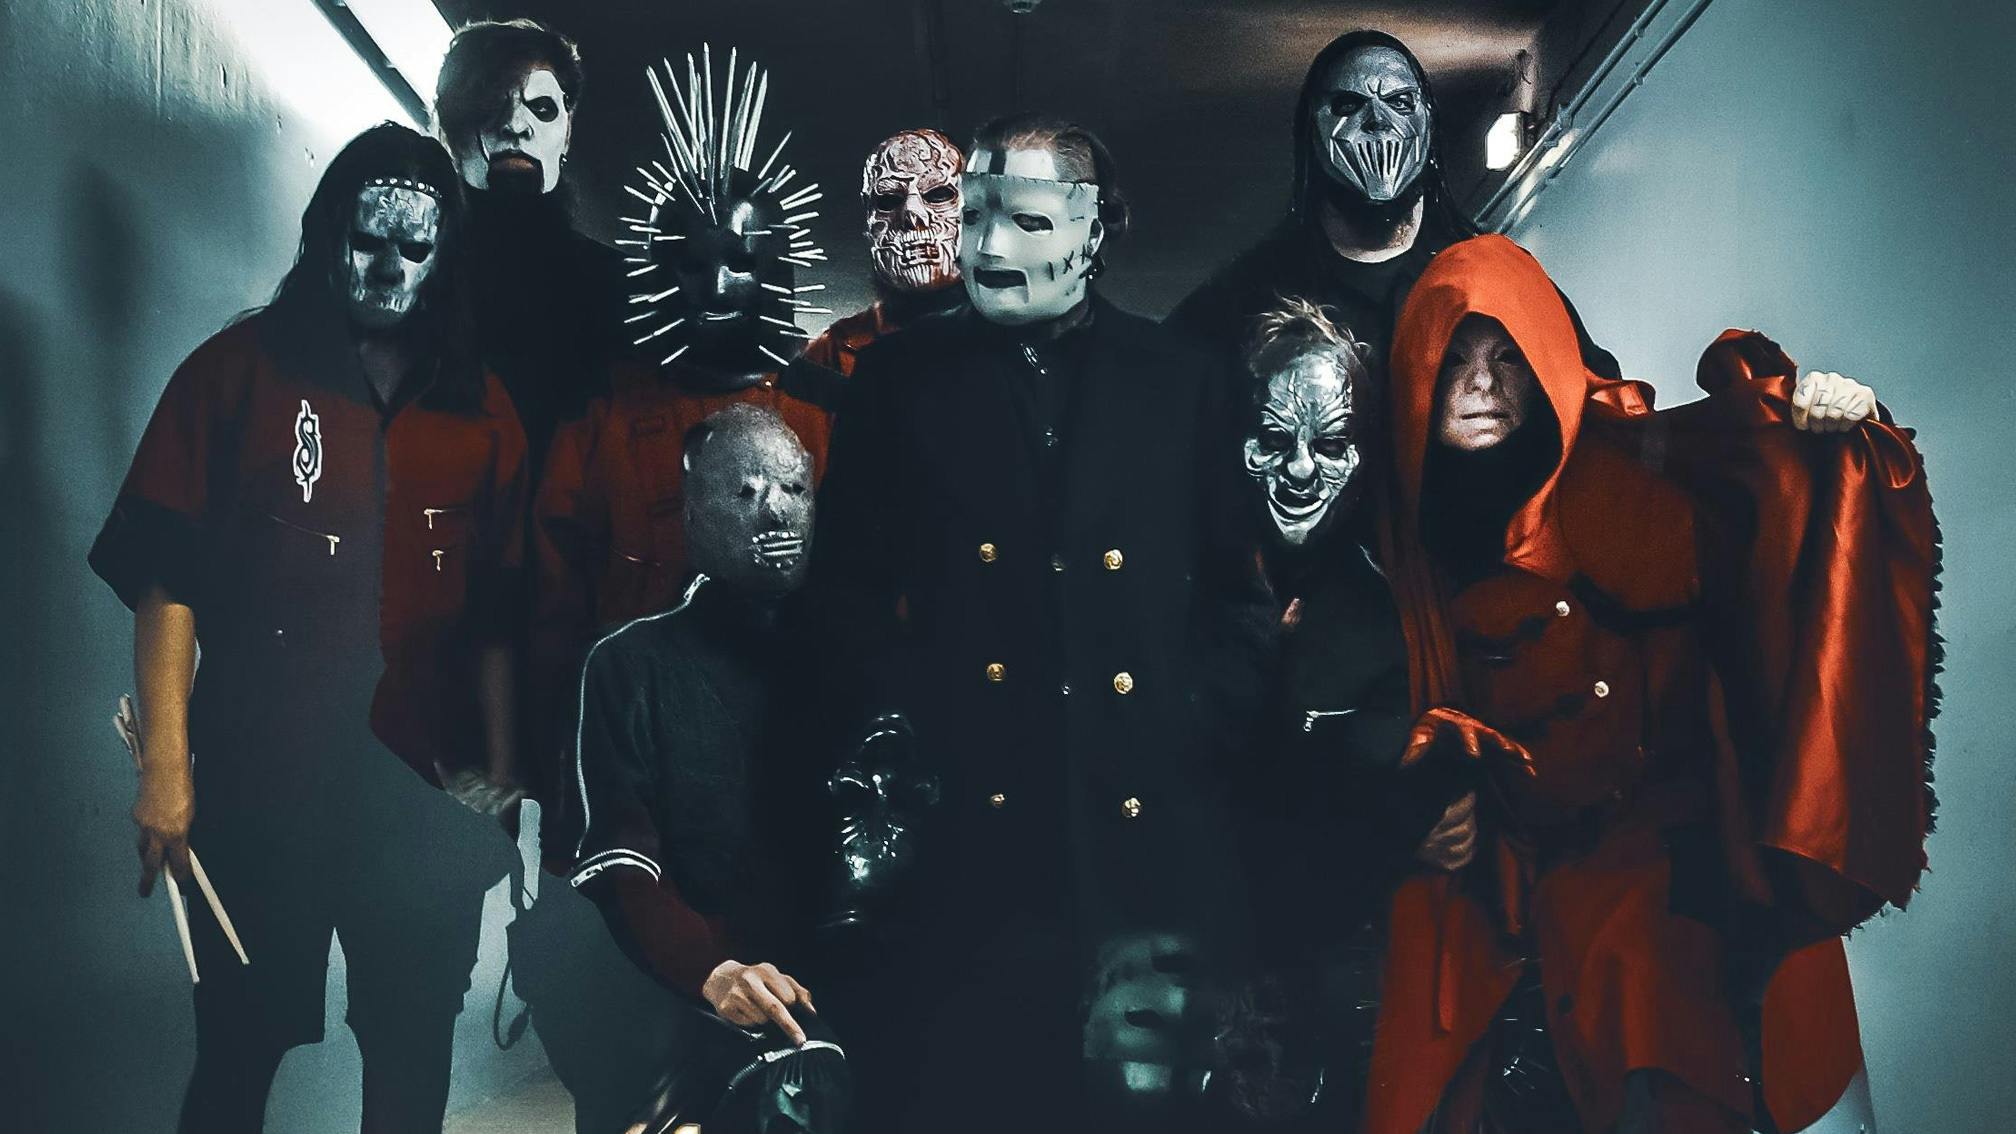 Corey Taylor on Slipknot's next album: "The music is brilliant… It expands on what we did with We Are Not Your Kind"